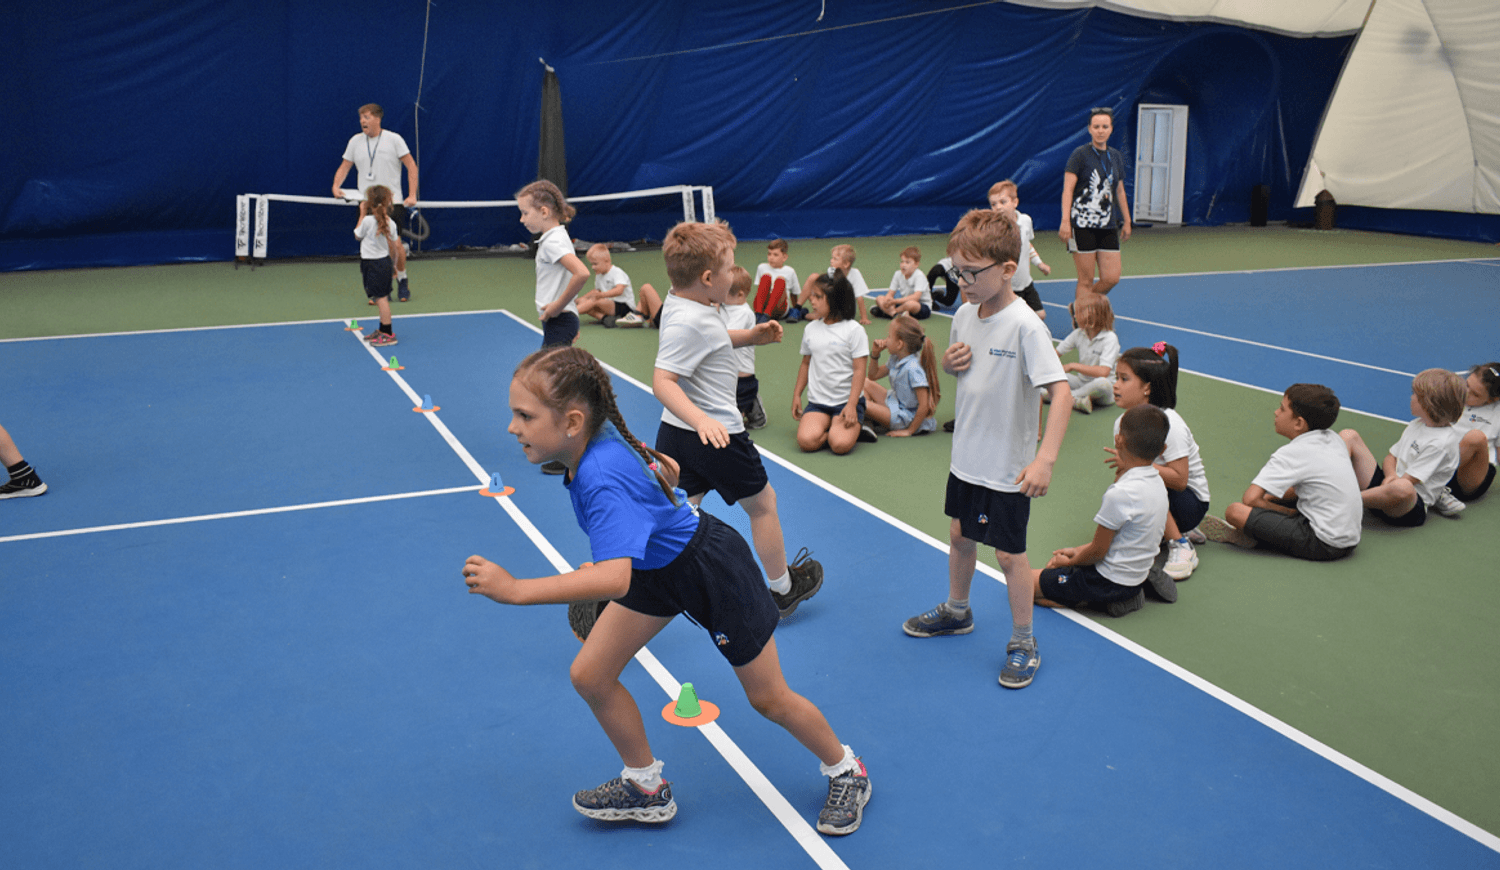 Primary Sports Day 16